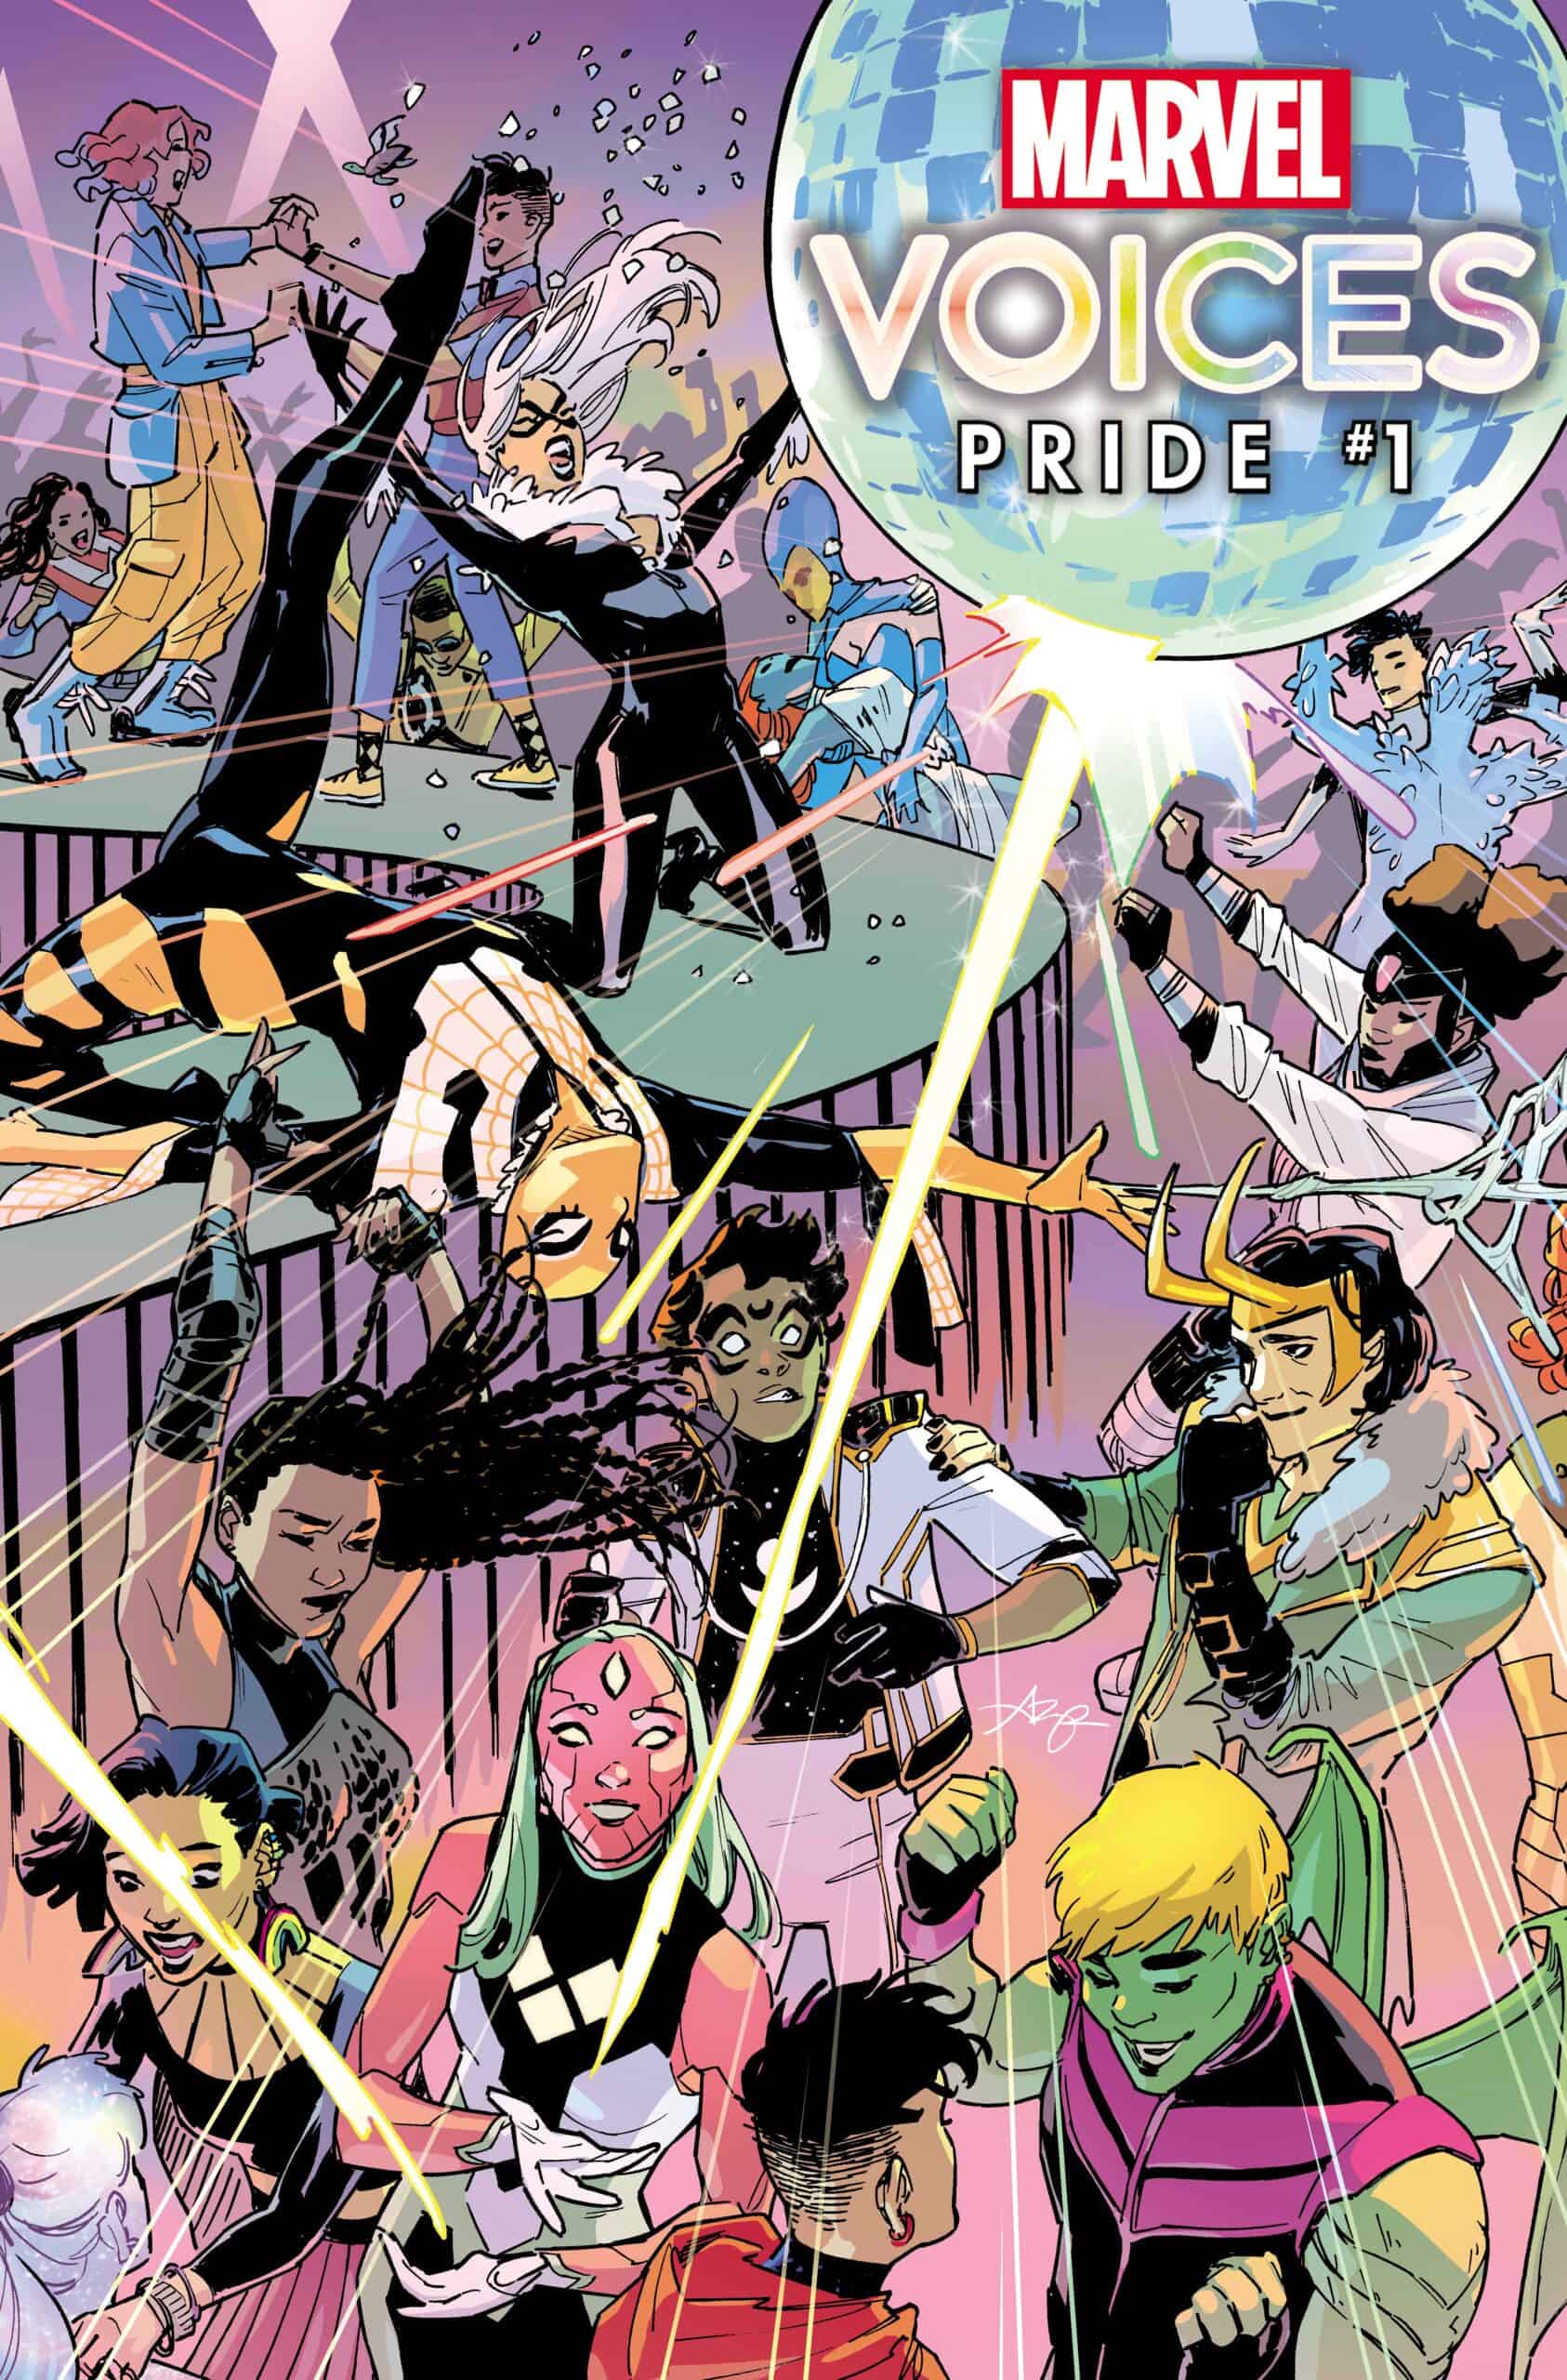 MARVEL'S VOICES PRIDE Returns With New Stories, Characters, & More